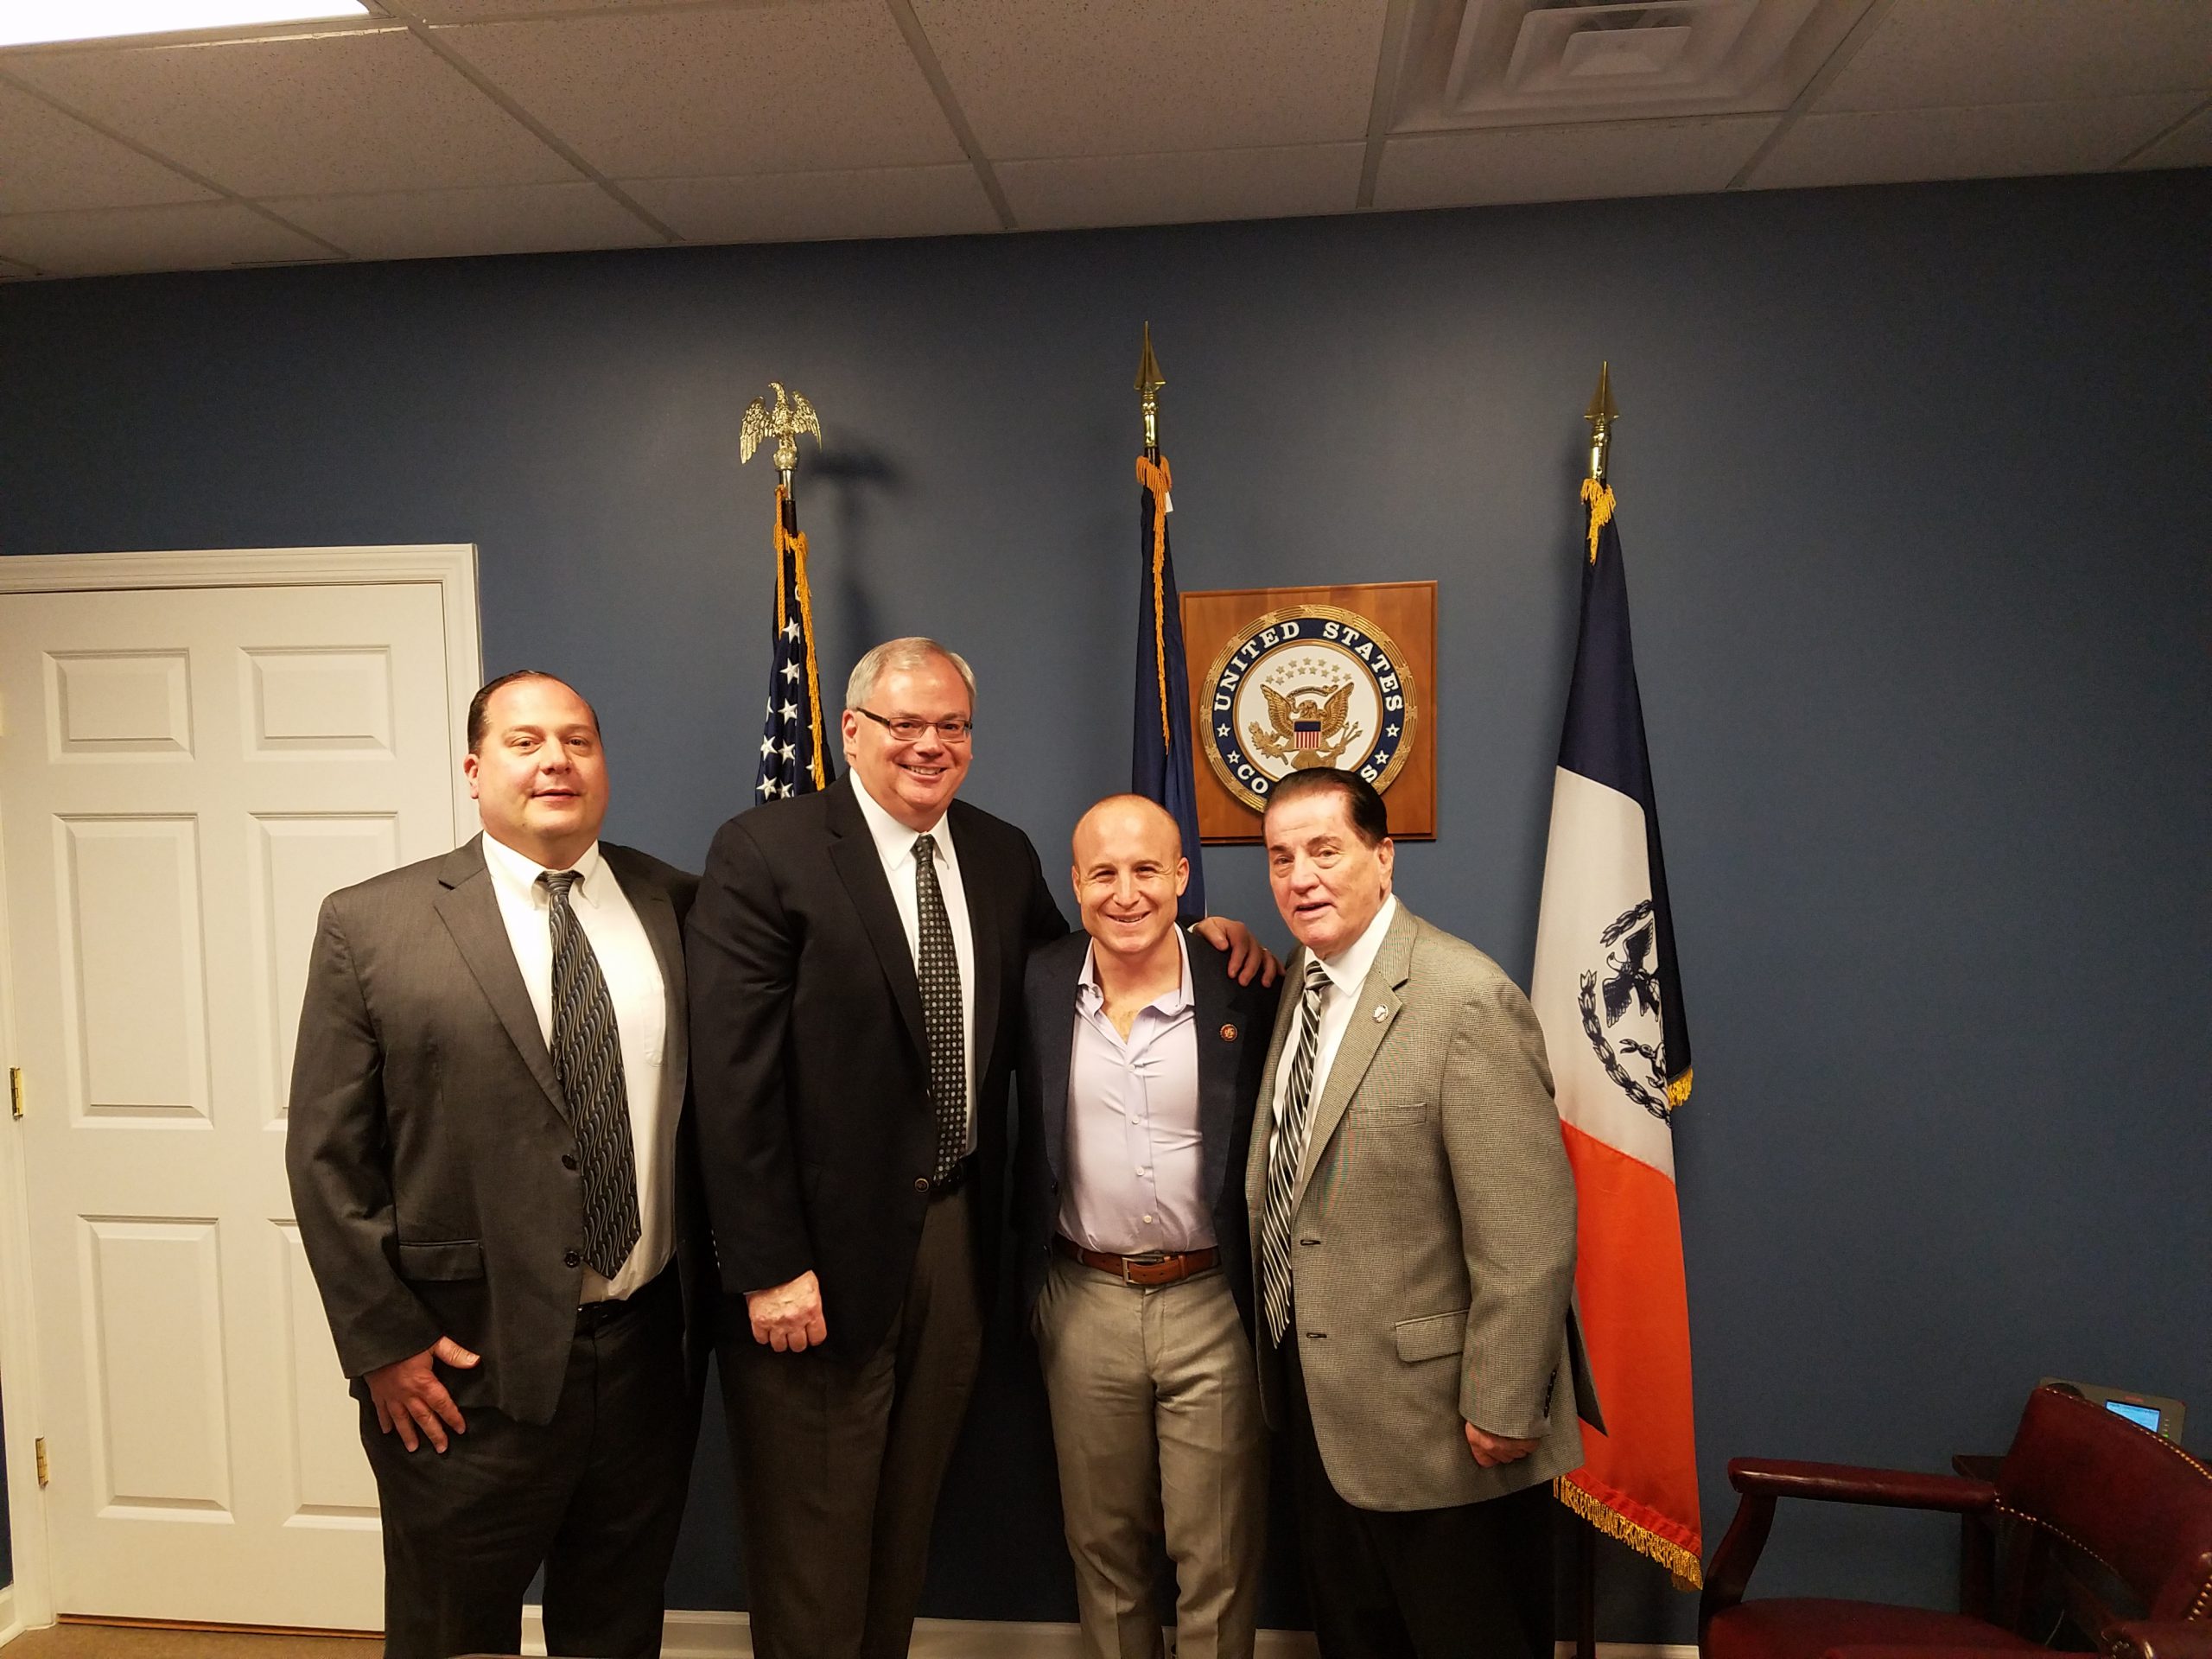 A very productive meeting was held with Congressman Max Rose. He is co-sponsoring all of our Postal legislation.